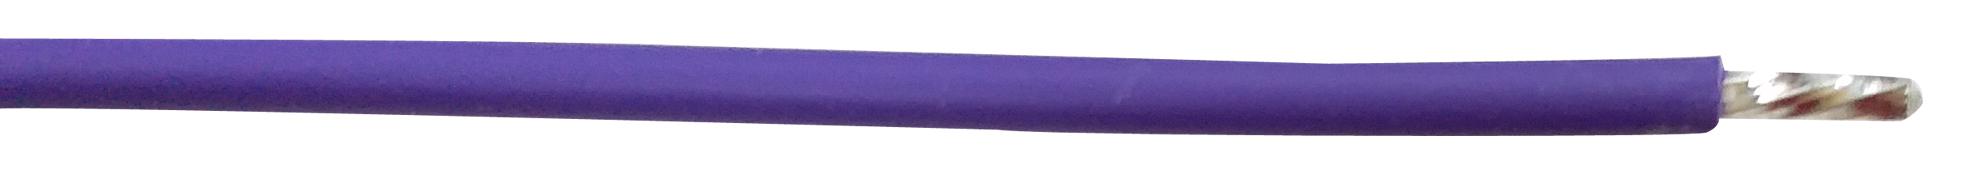 PP002378 HOOK-UP WIRE, 18AWG, PURPLE, 305M, 300V PRO POWER